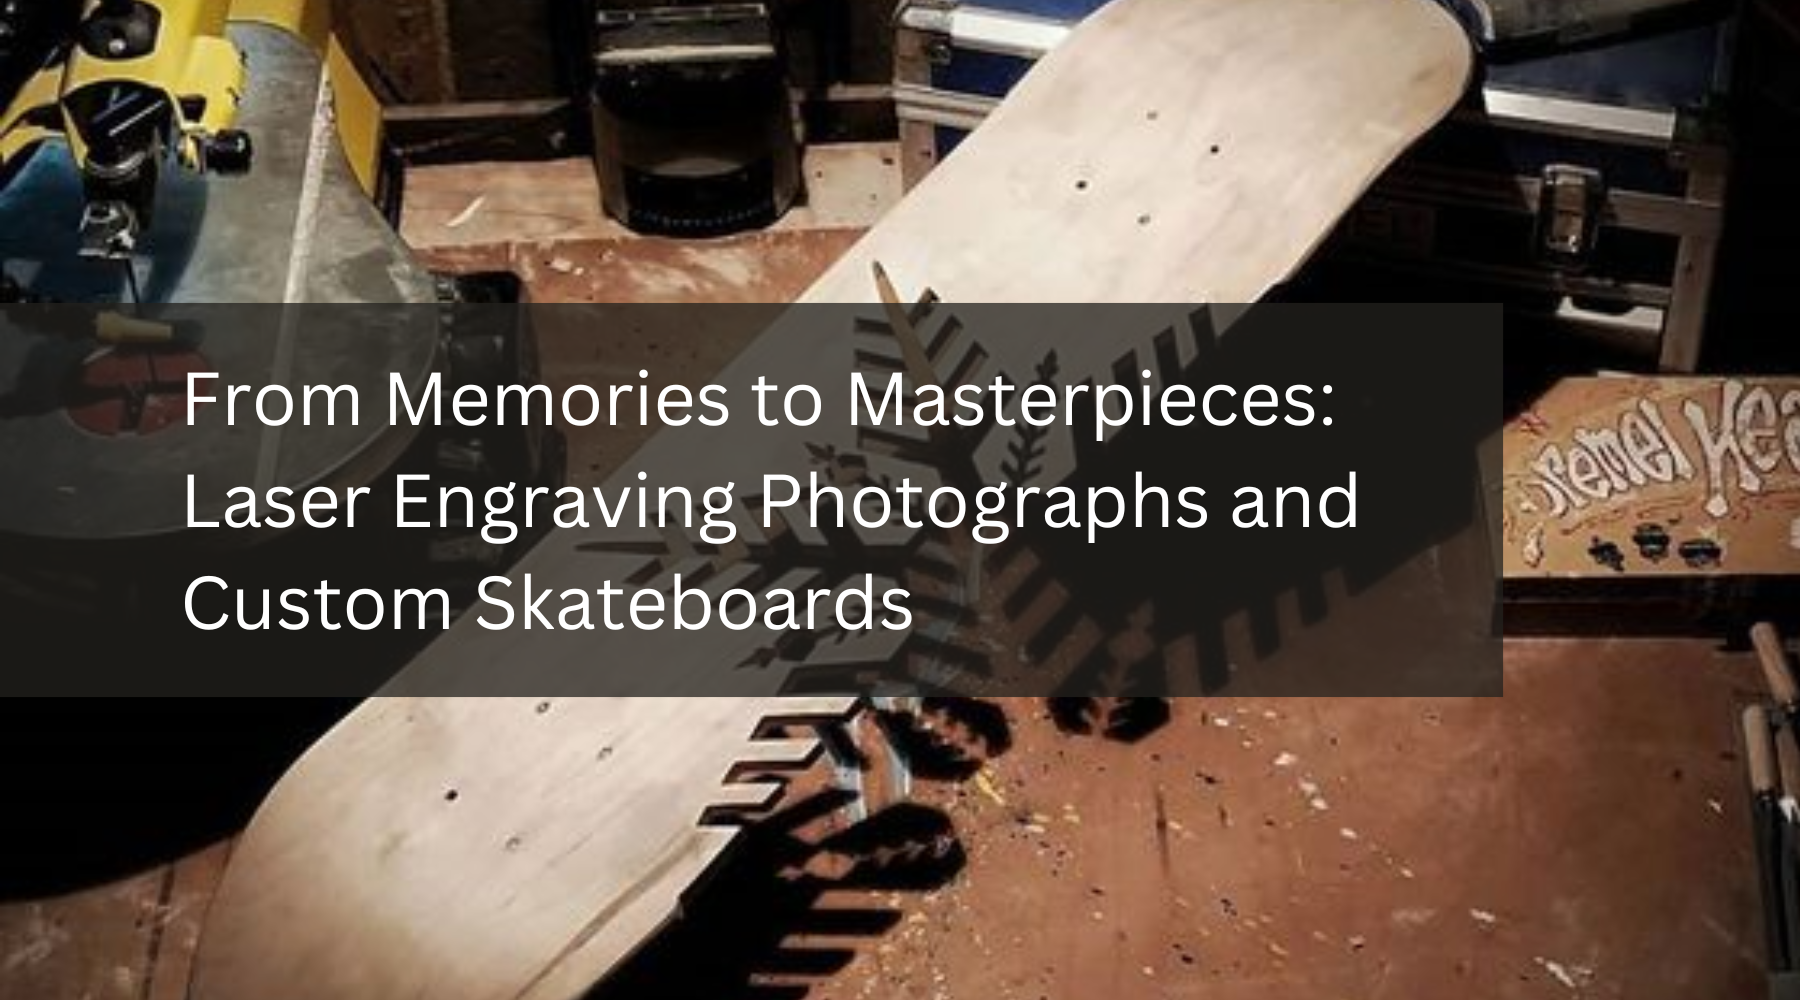 From Memories to Masterpieces: Laser Engraving Photographs and Custom Skateboards